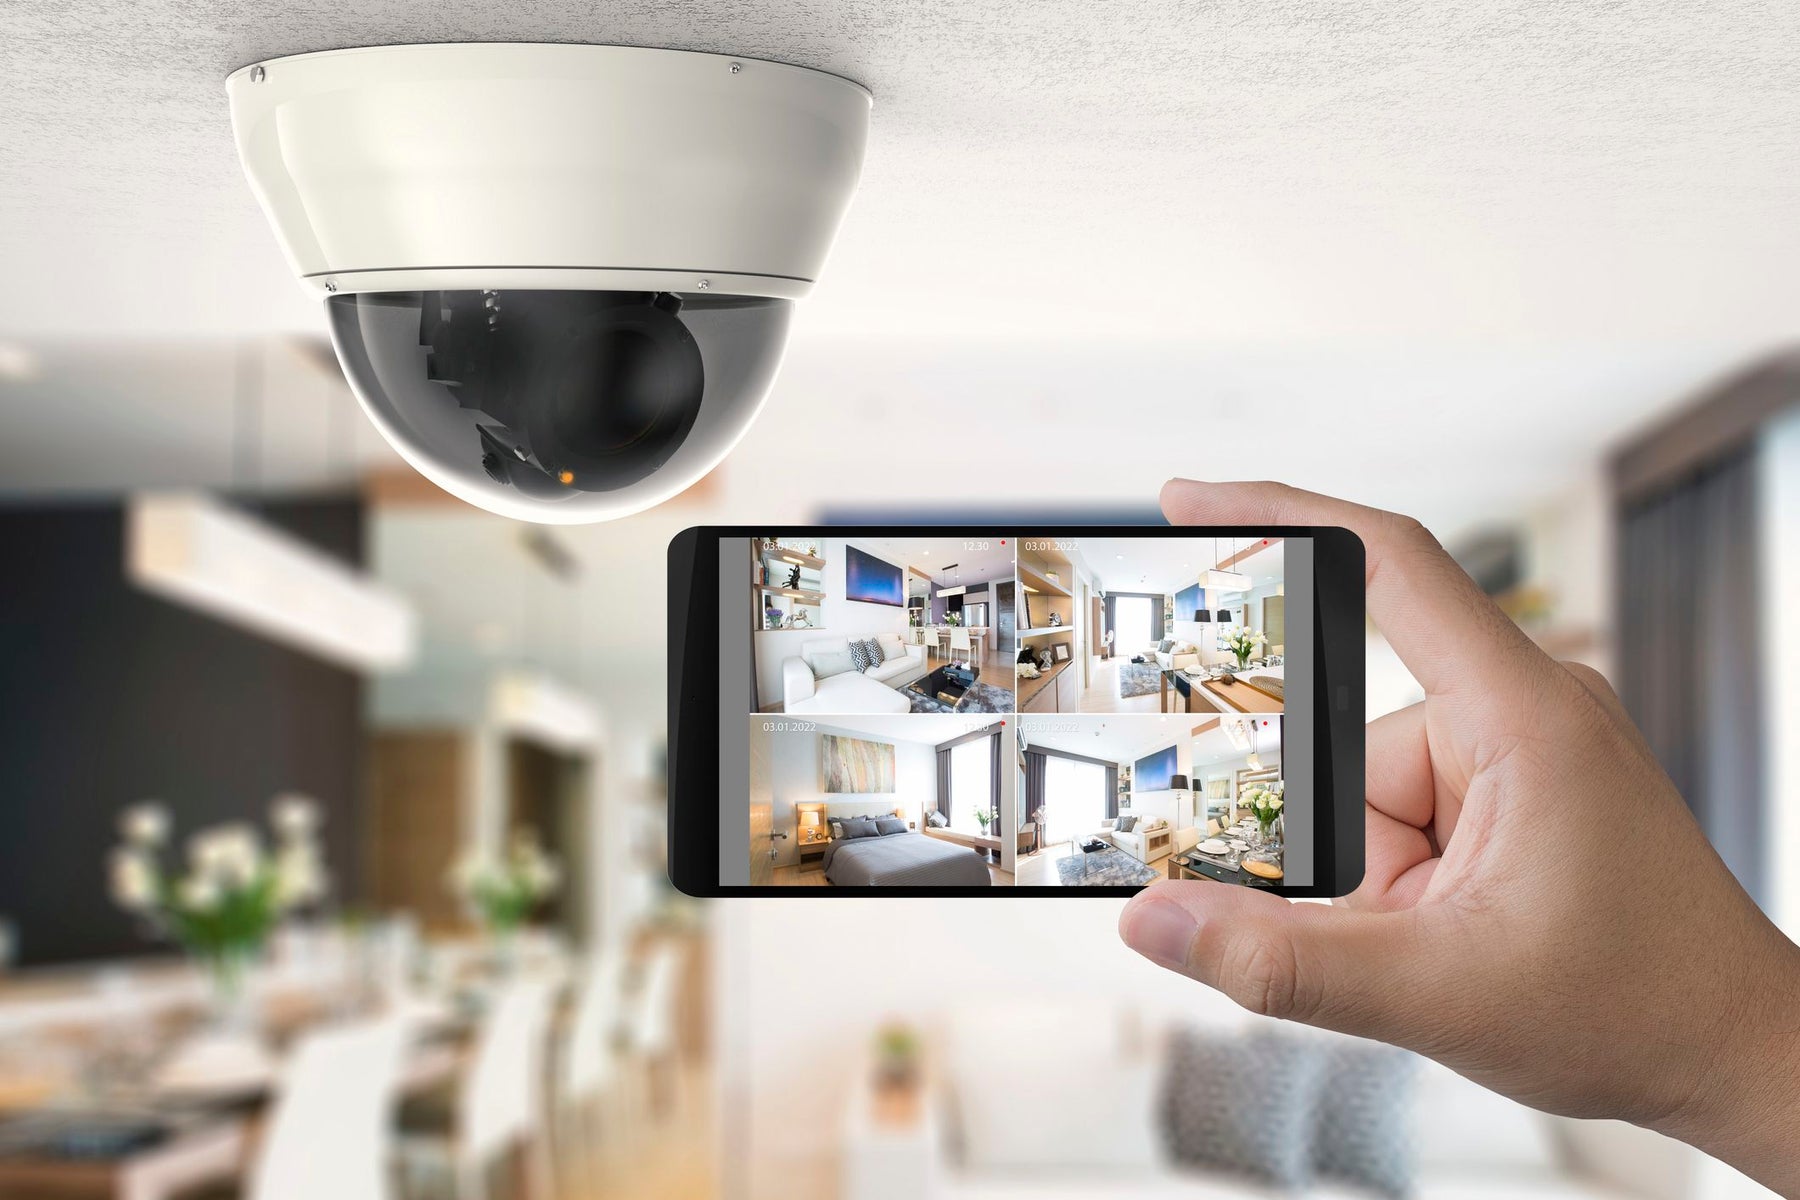 Best Wireless Motion Detection Alarms-The Top Three